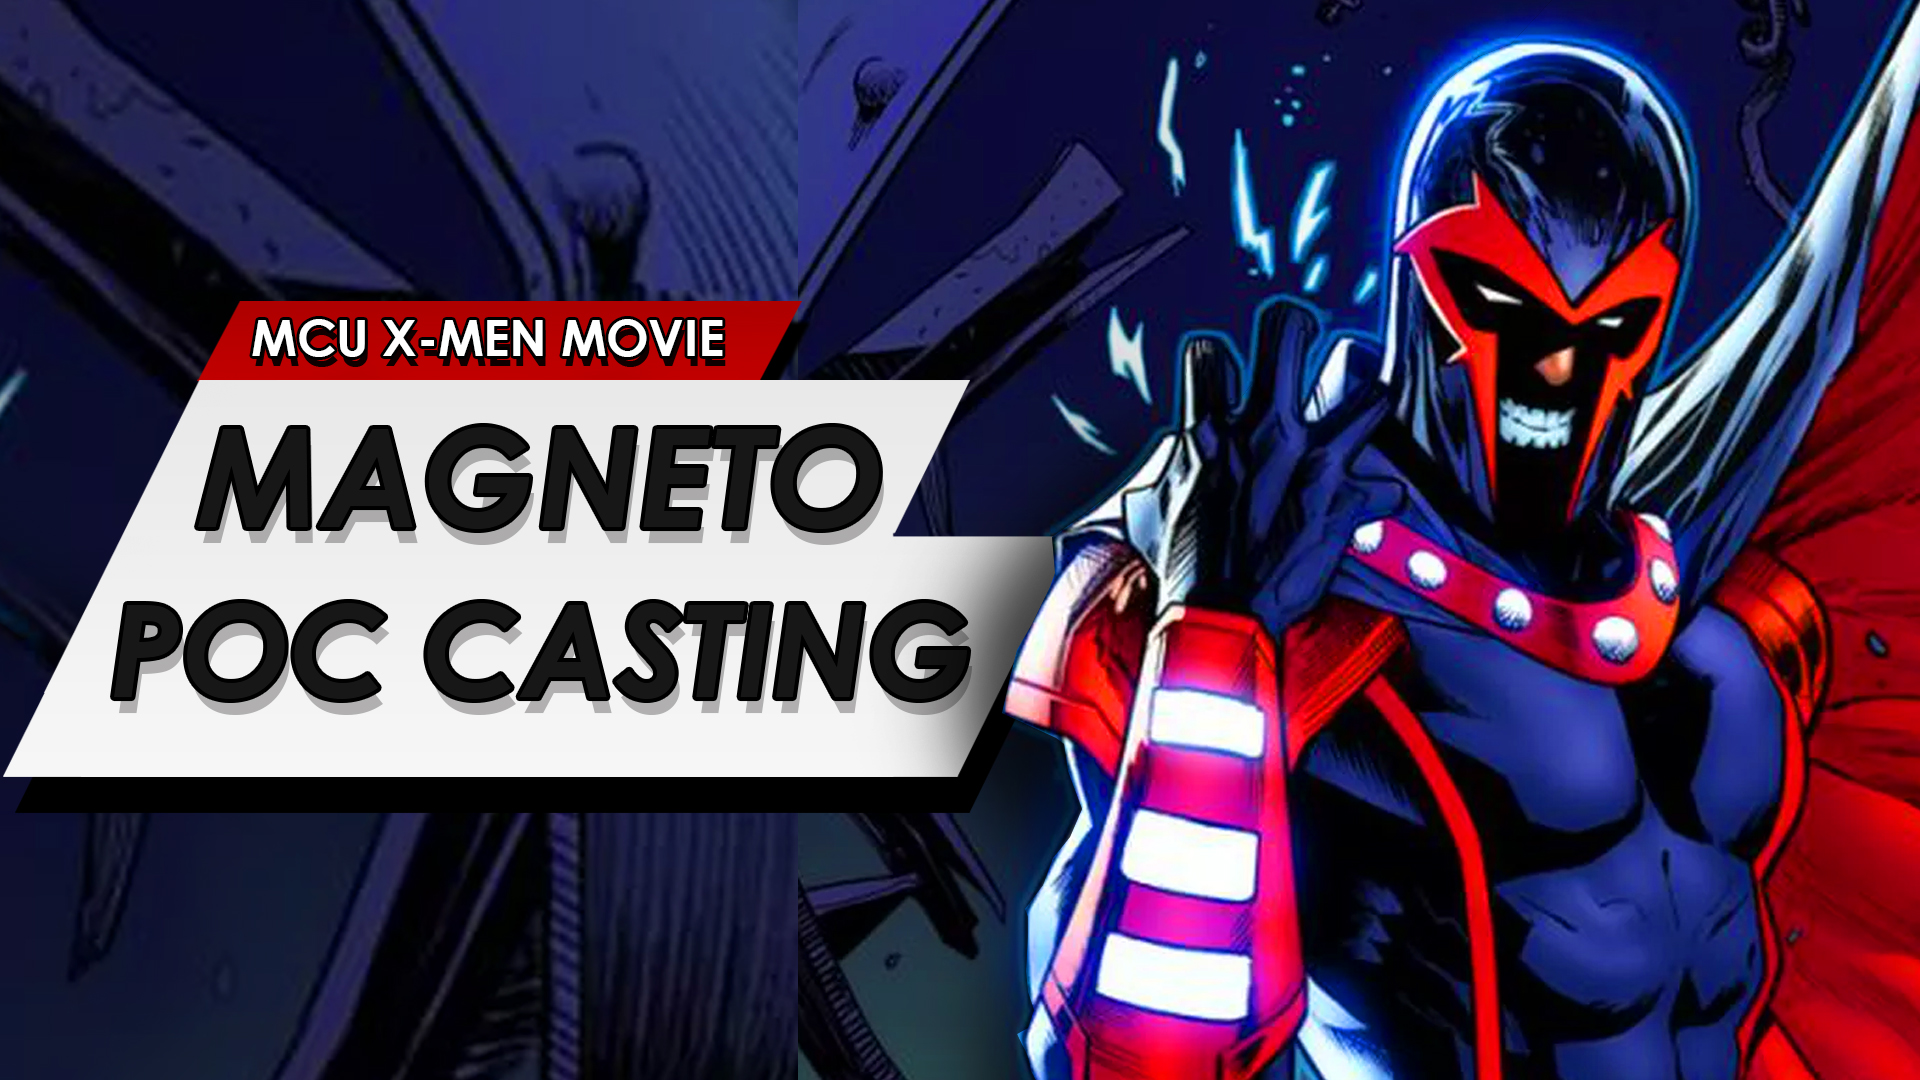 marvel studios mcu want poc person of color for magneto and professor x for new x men movie casting news black asian latino actor in talks will smith idris elba